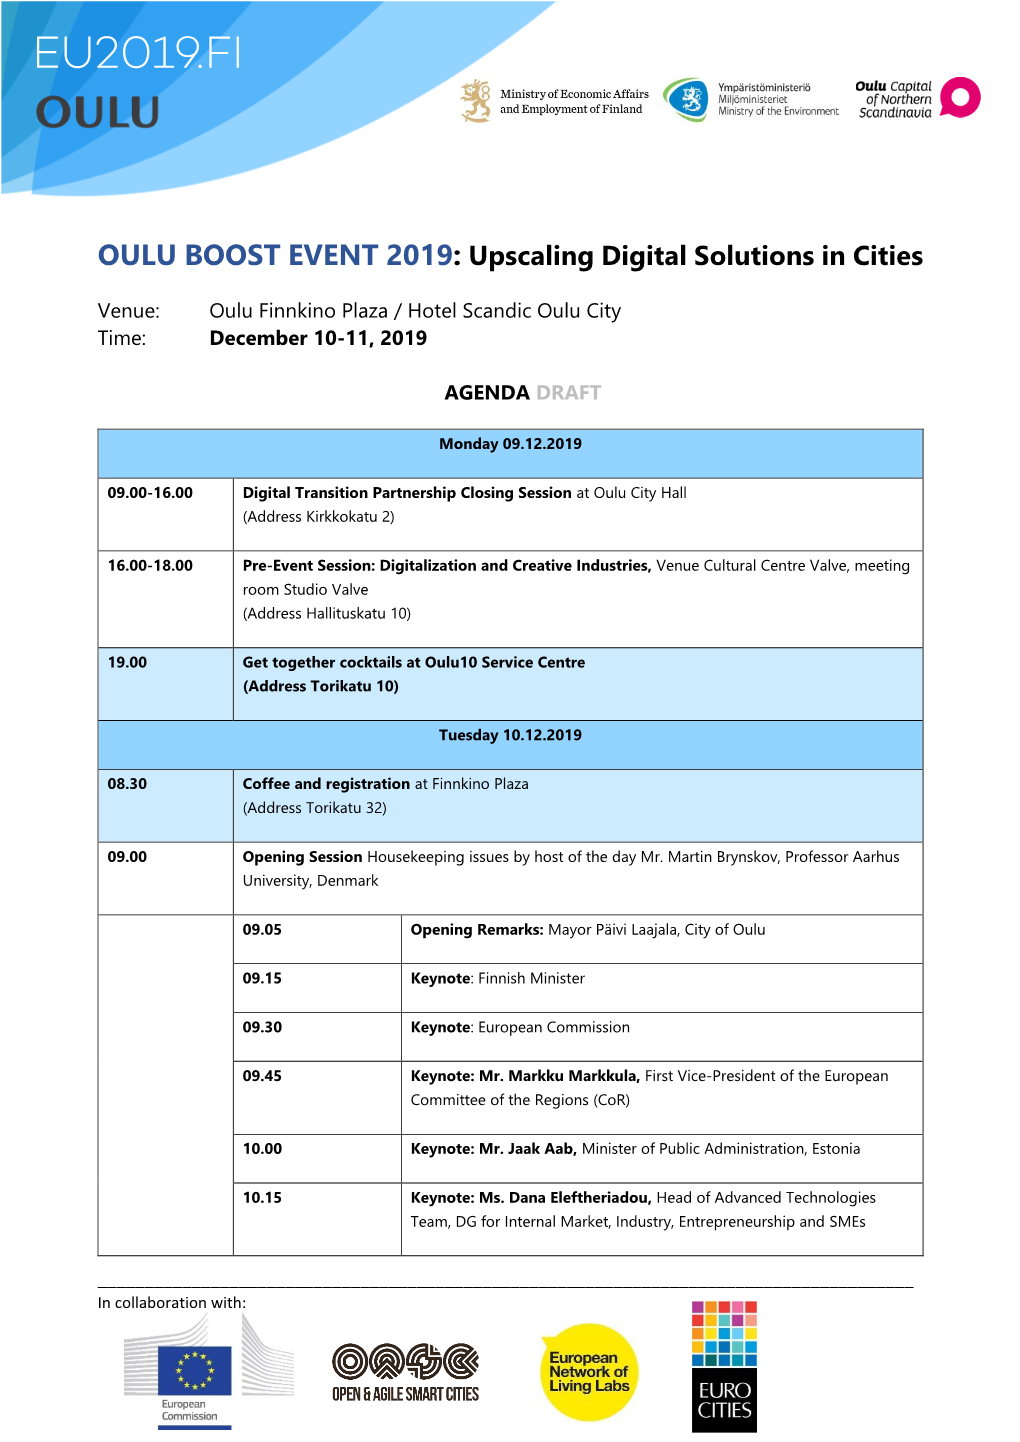 OULU BOOST EVENT 2019: Upscaling Digital Solutions in Cities